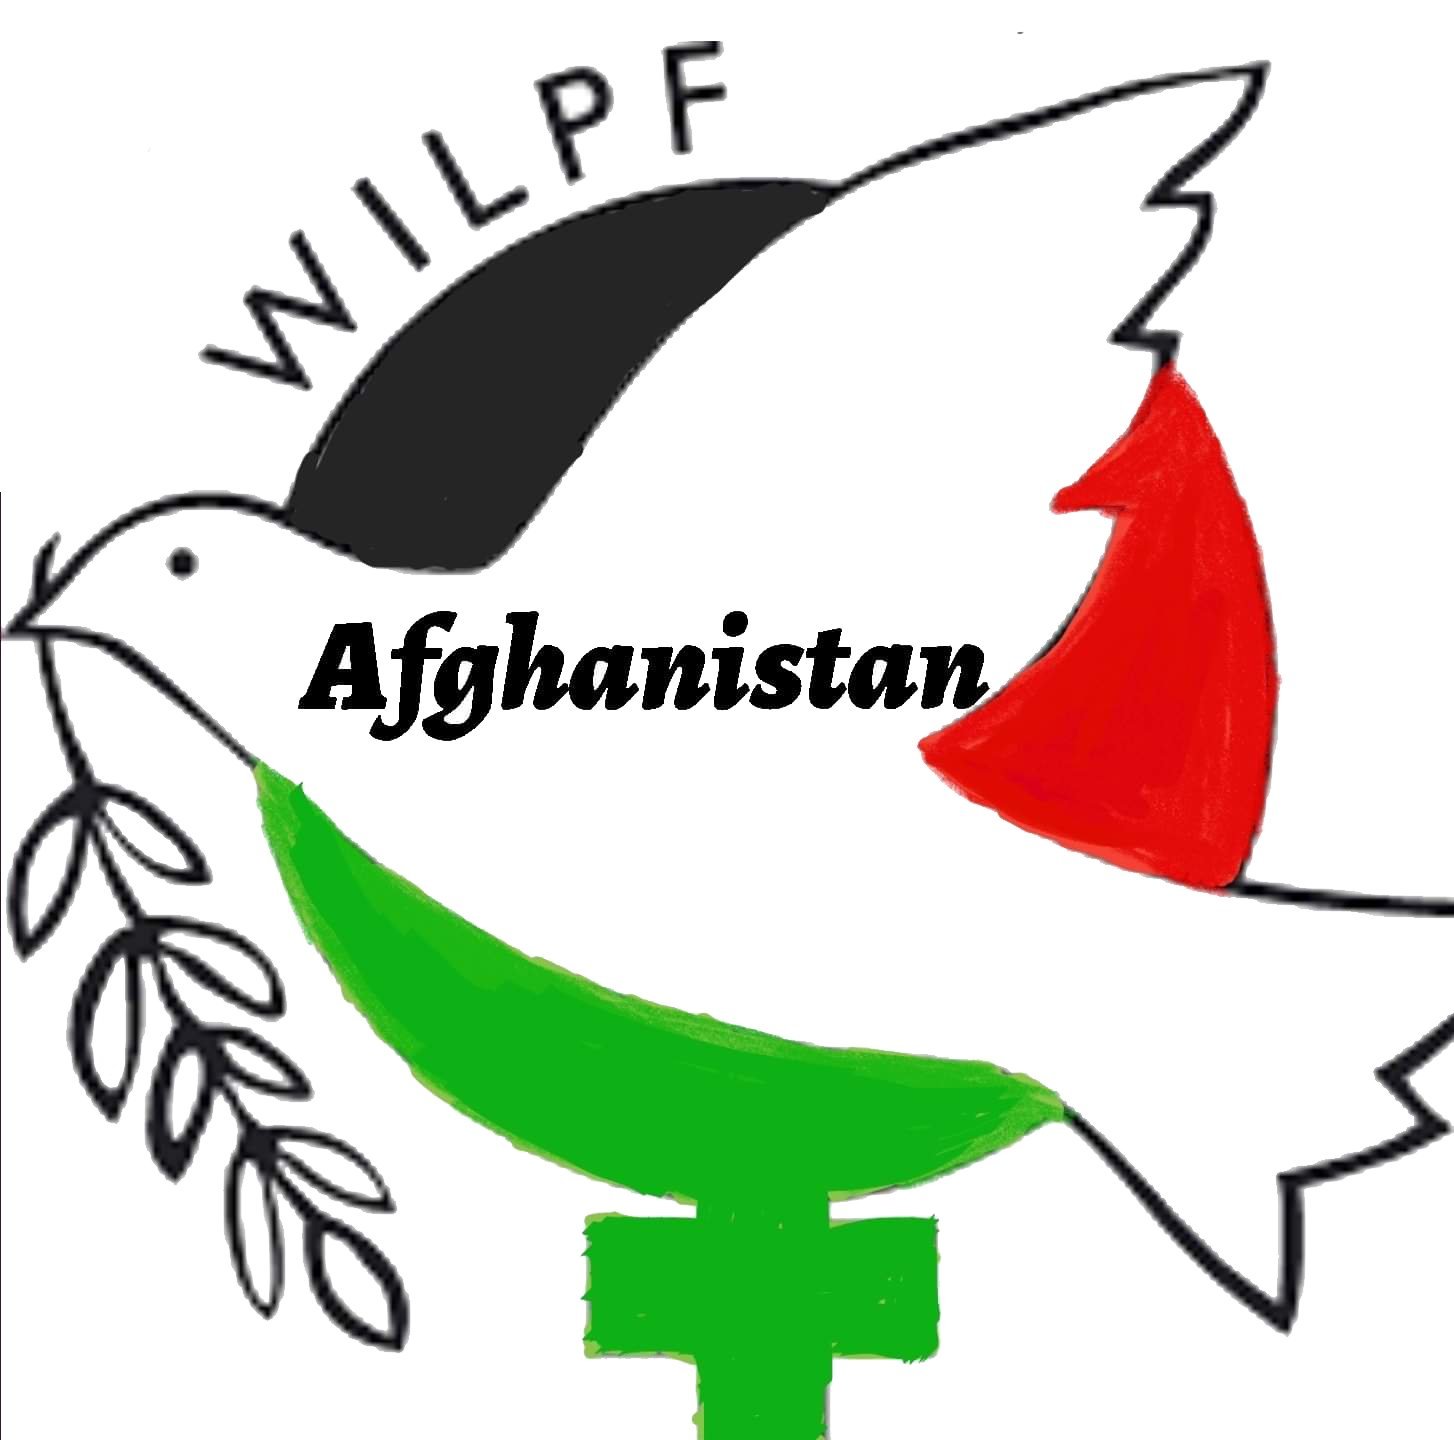 We aim to bring together women, men, and youths from diverse walks of life to enhance their positive role in social justice and sustainable peace in Afghanistan